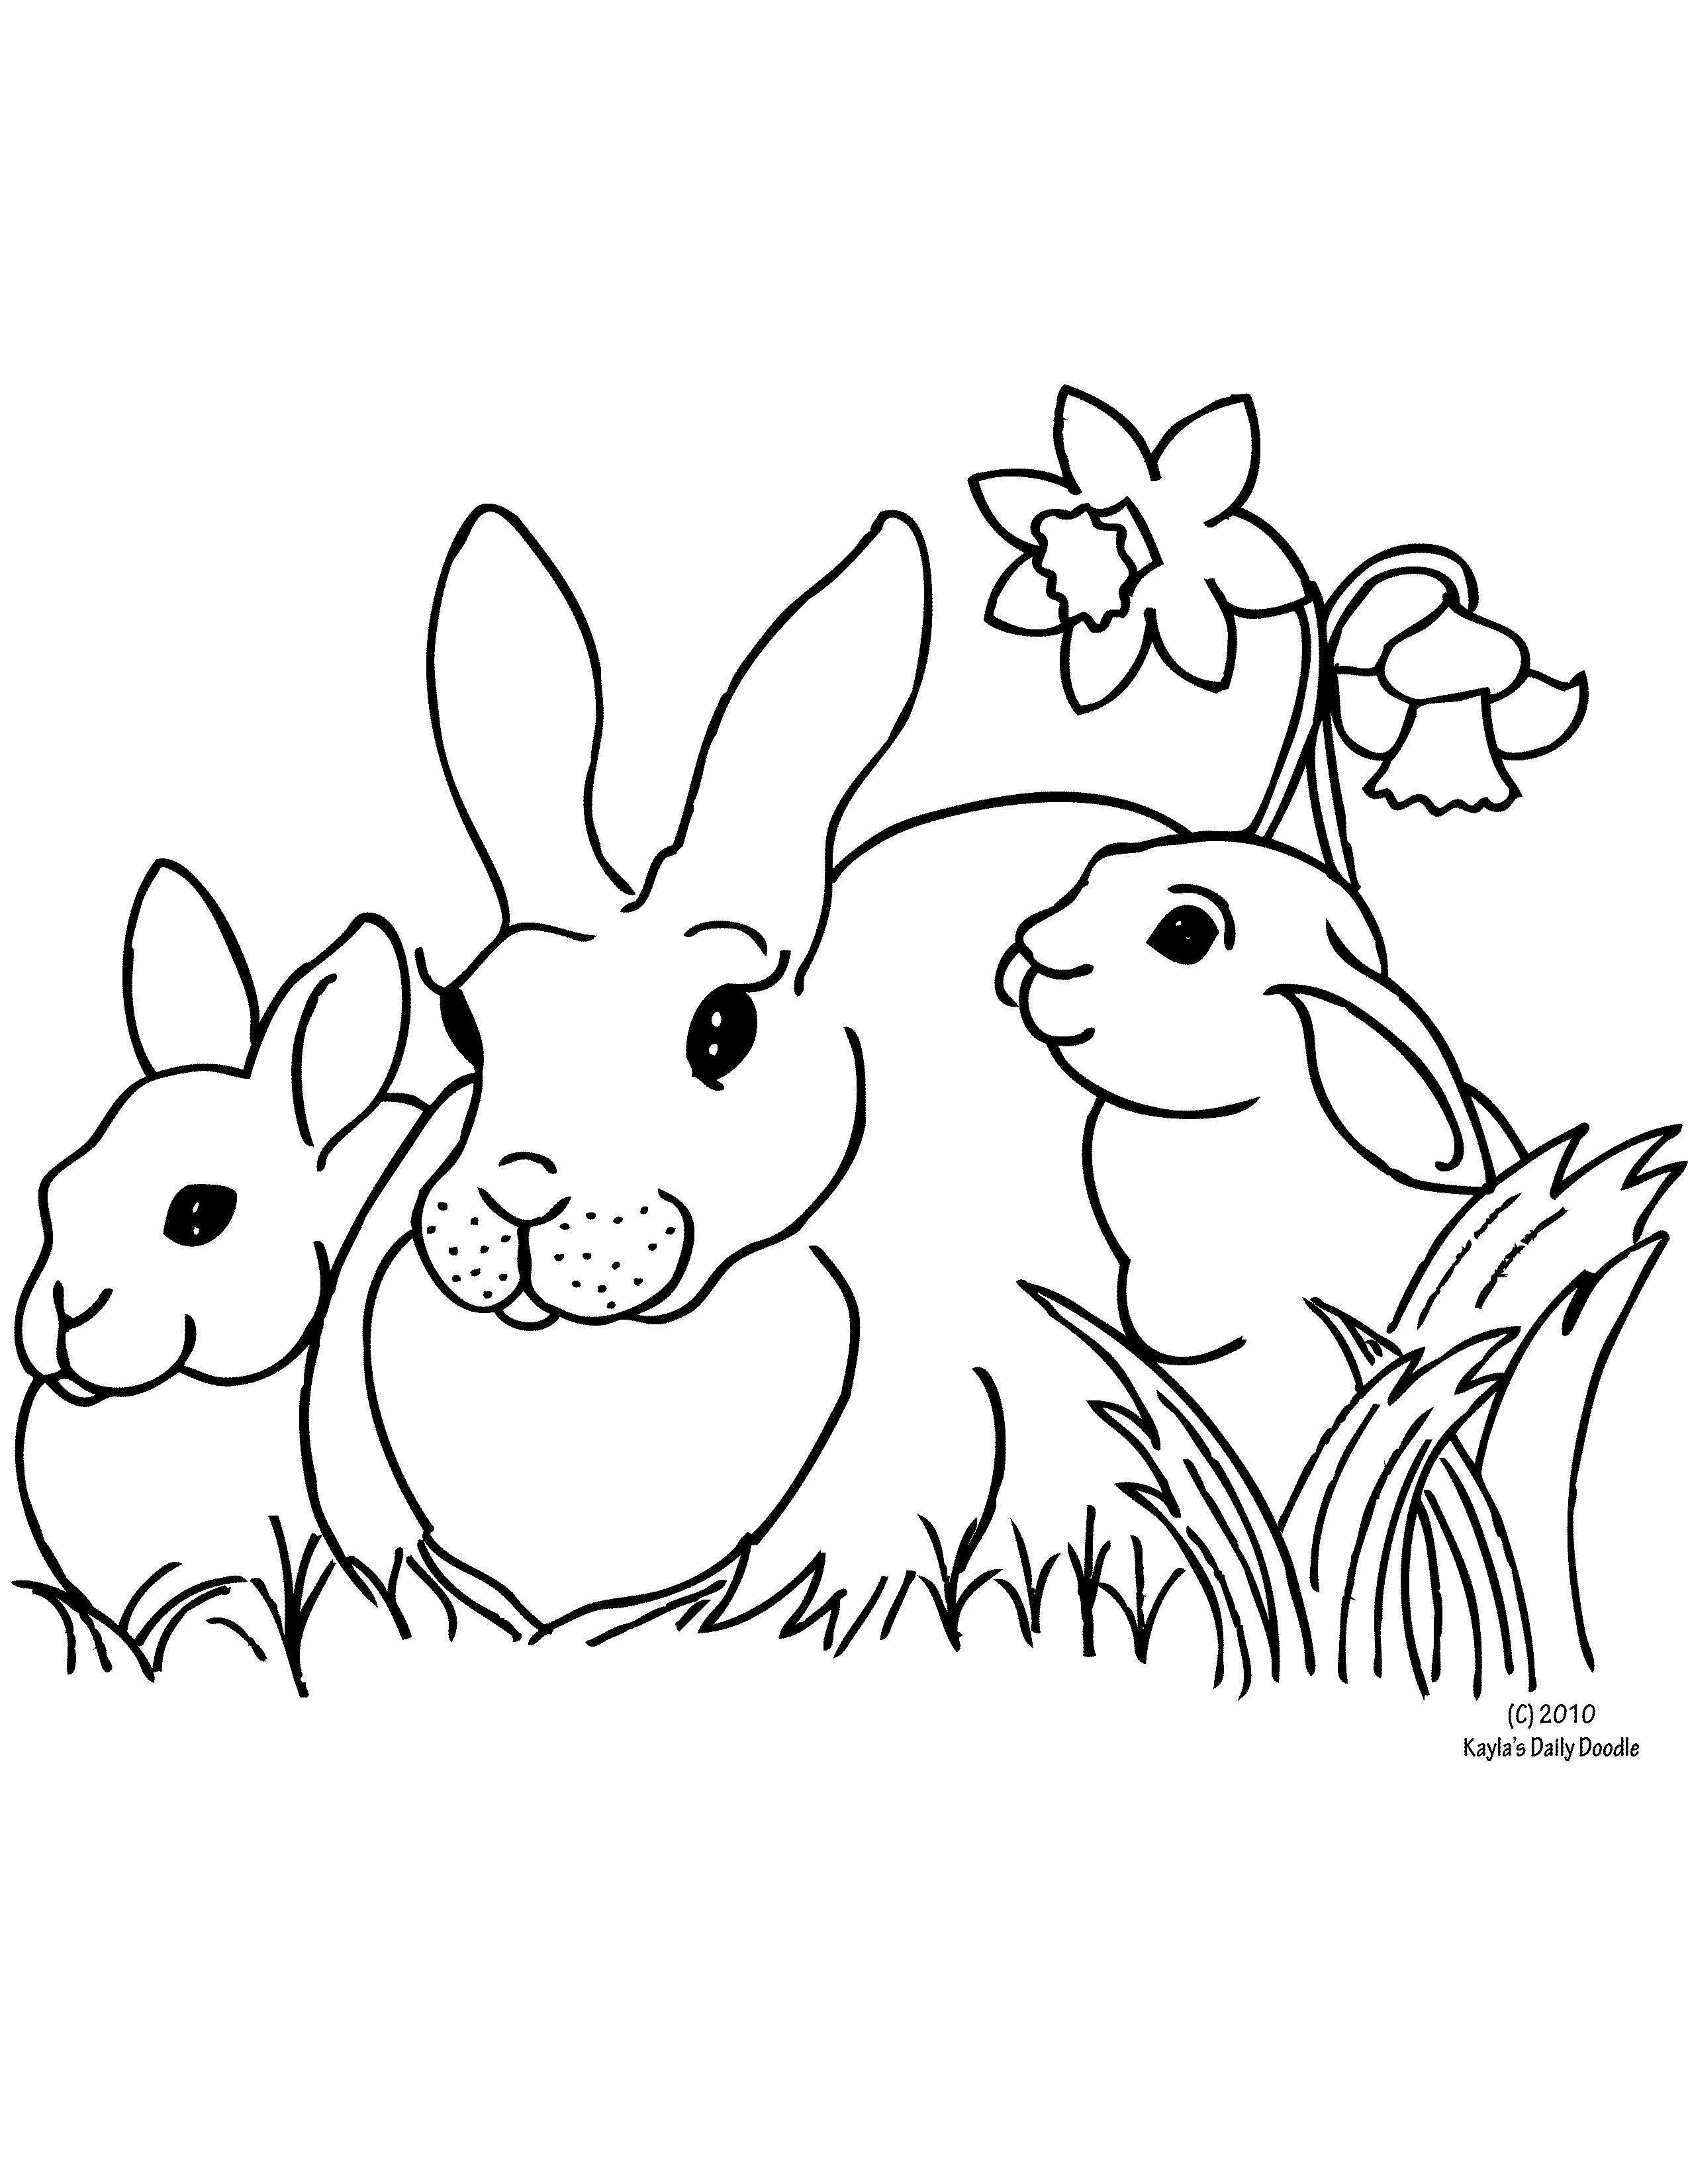 Free Rabbit Coloring Pages Bunny Rabbit Coloring Pages Inspirational Free Bunny Rabbit Coloring